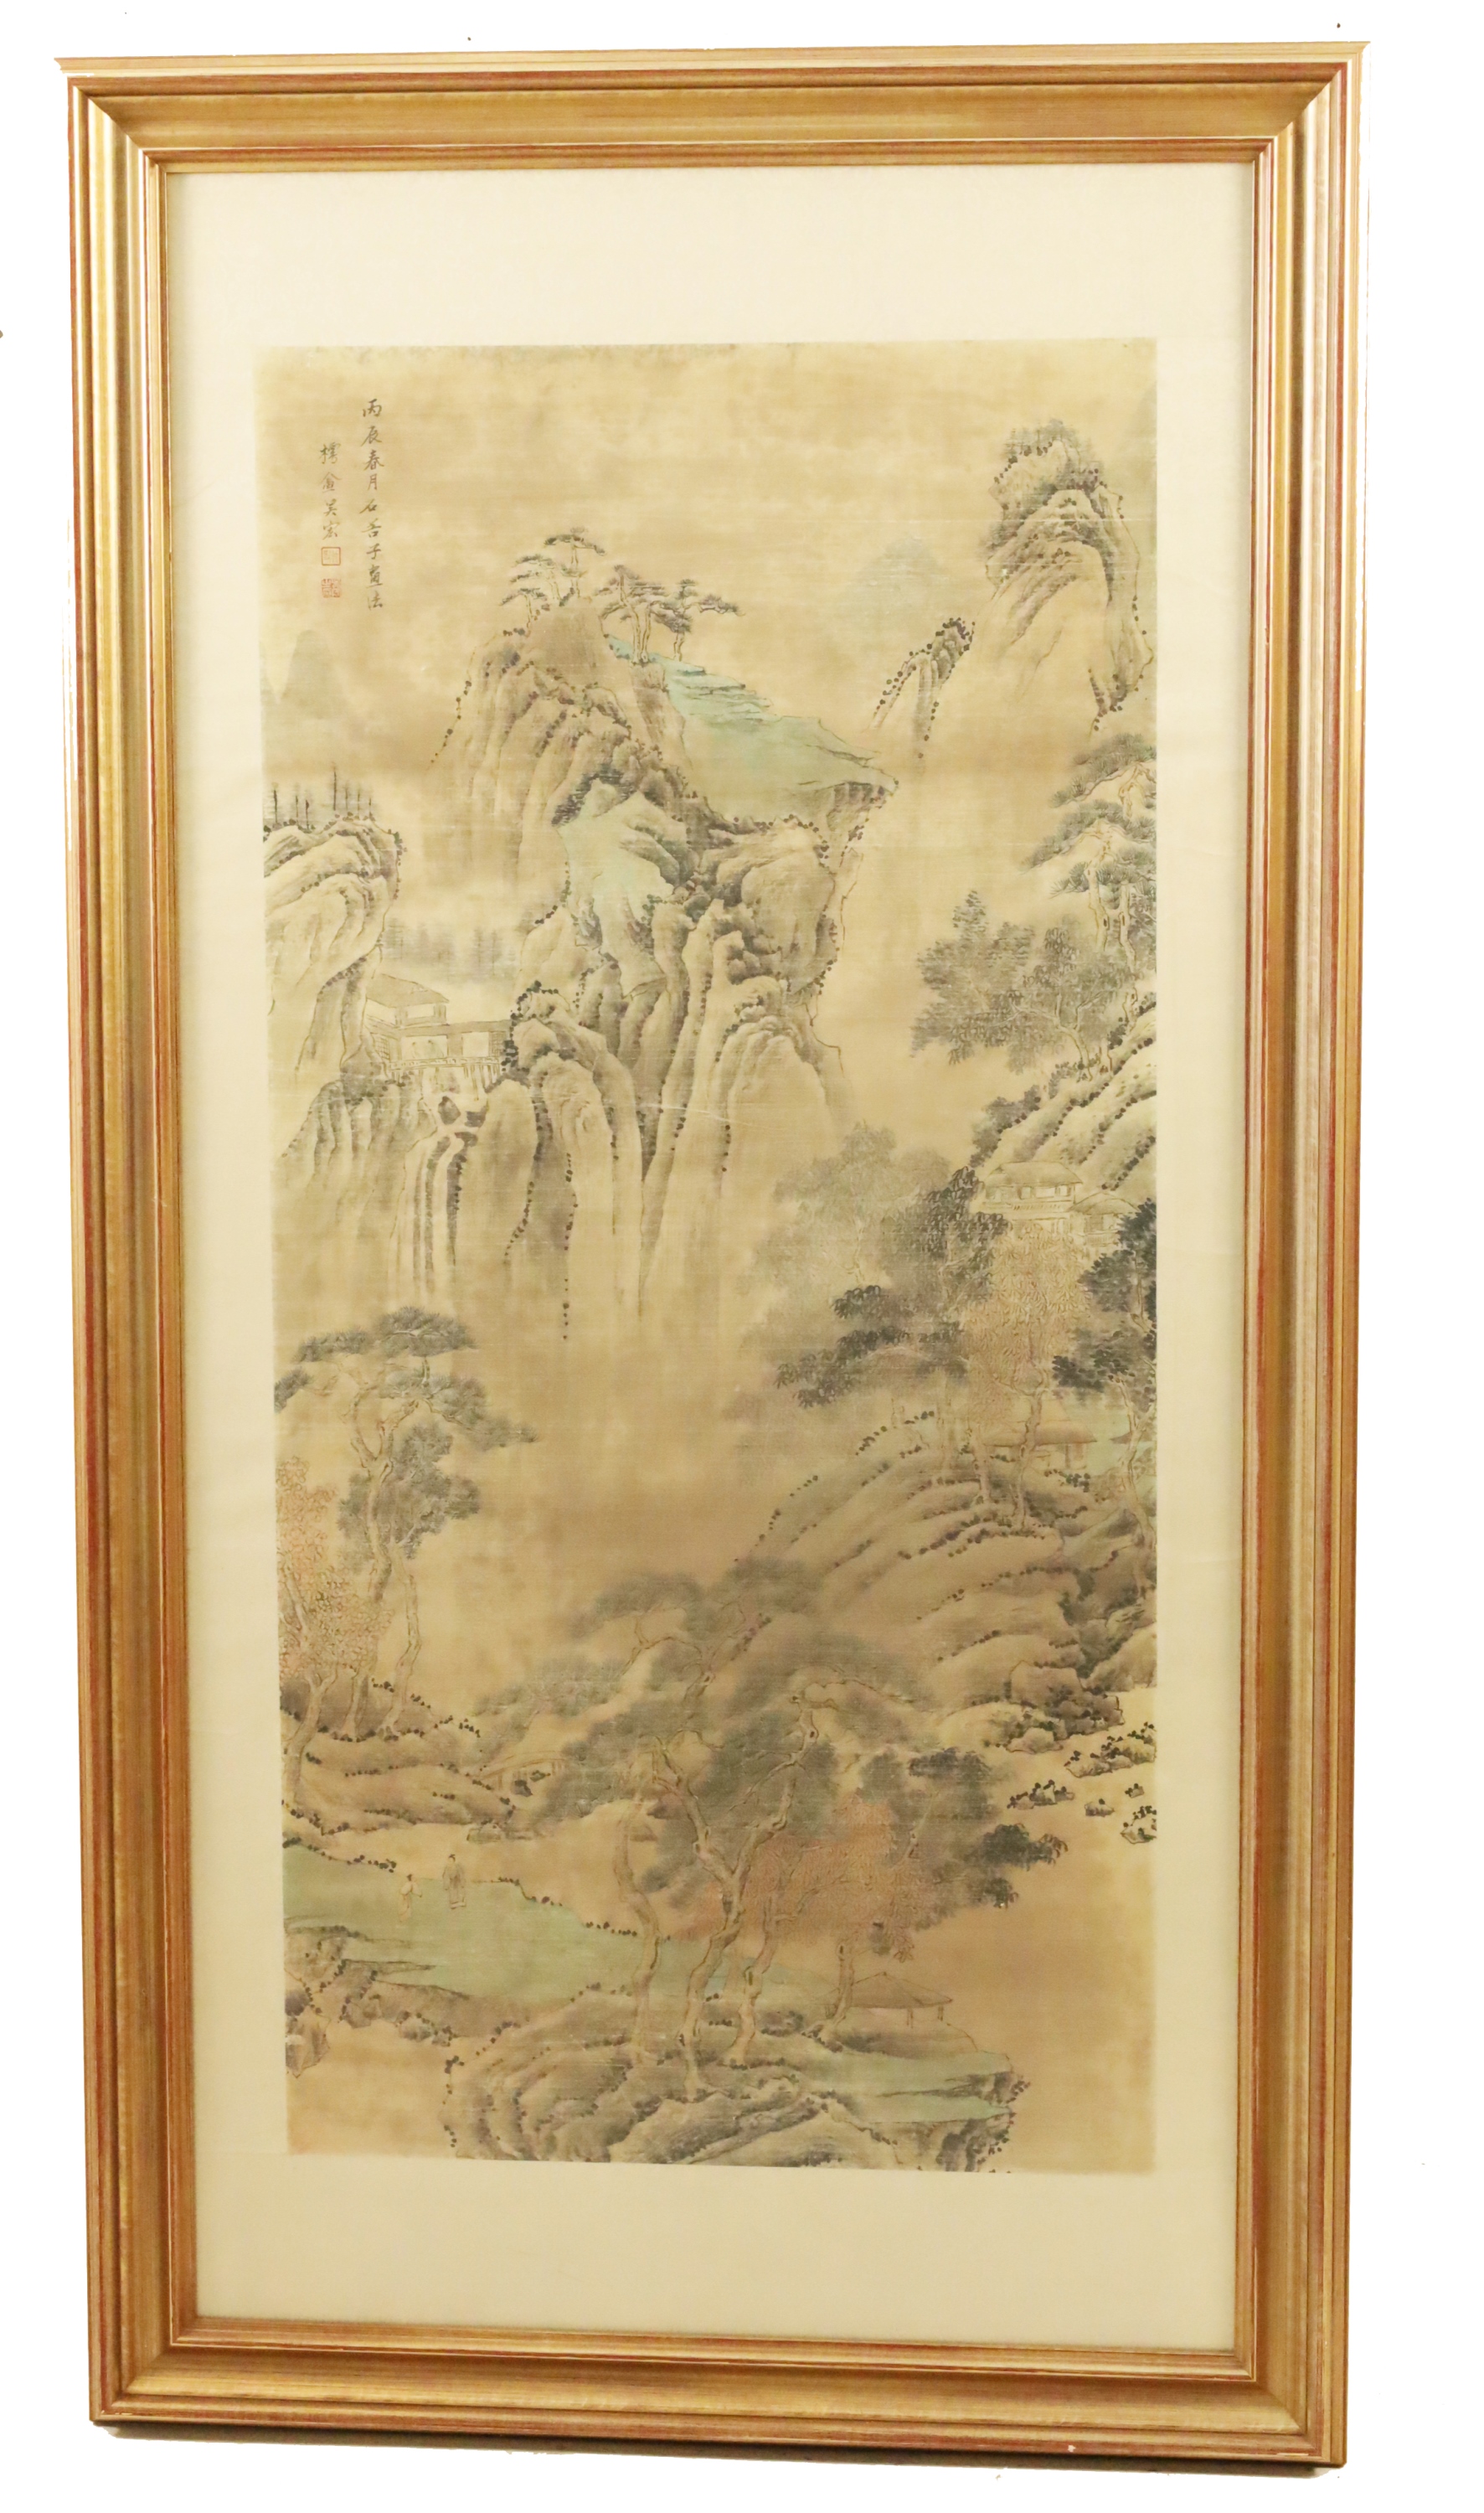 CHINESE WATERCOLOR ON PAPER, QING